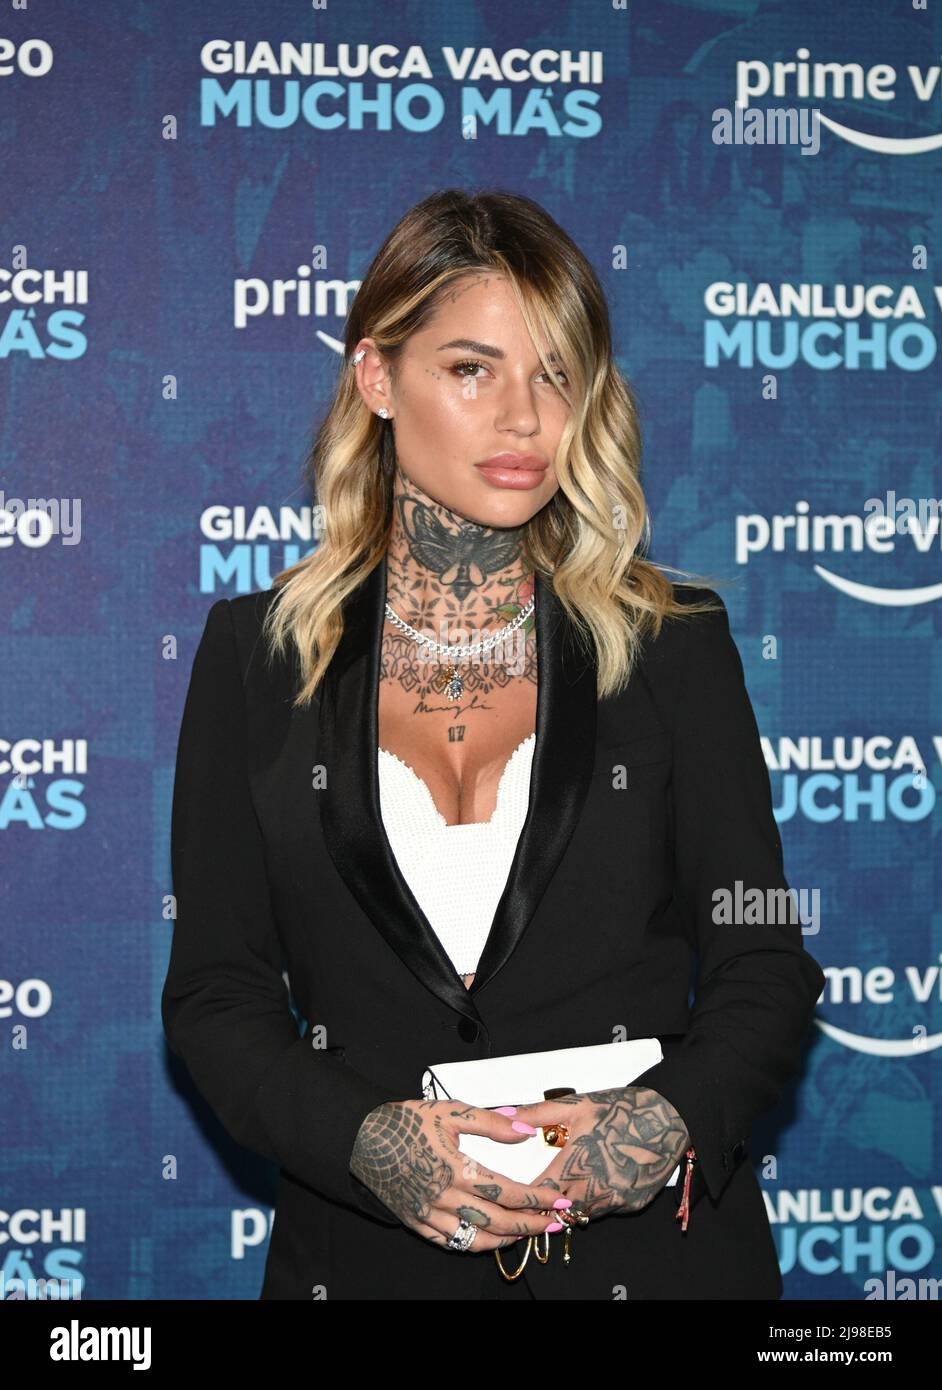 Monza, Italy. 21st May, 2022. Monza, Italy Gianluca Vacchi photocall at  Villa Reale presentation of the documentary Mucho Mas on Prime Video In the  photo: Giulia Penna Credit: Independent Photo Agency/Alamy Live